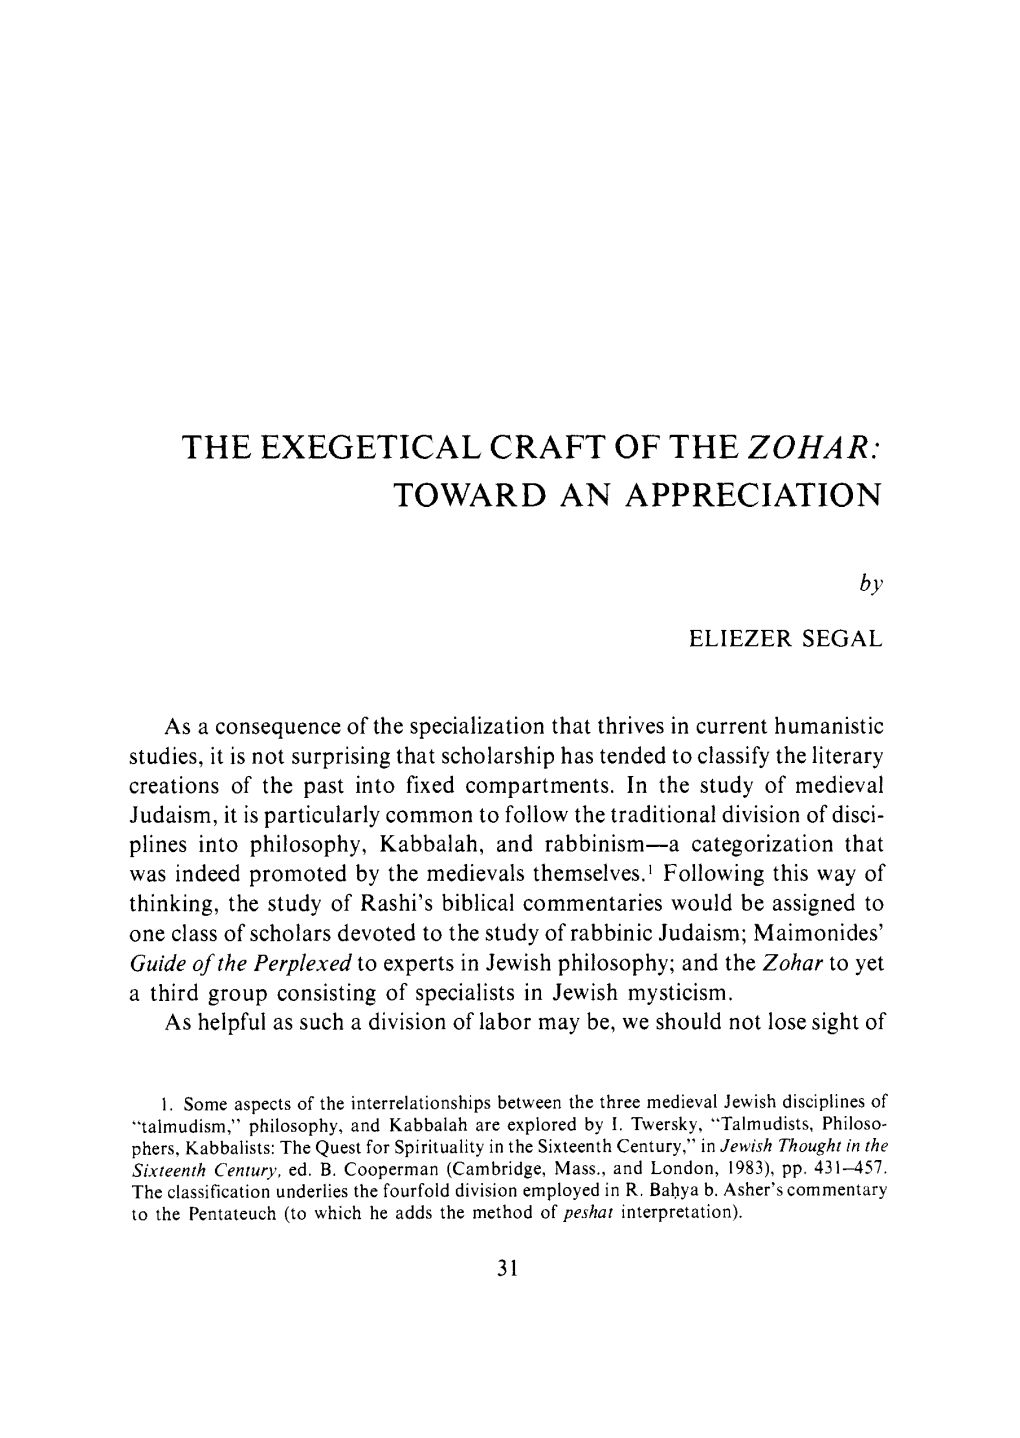 The Exegetical Craft of the Zohar: Toward an Appreciation